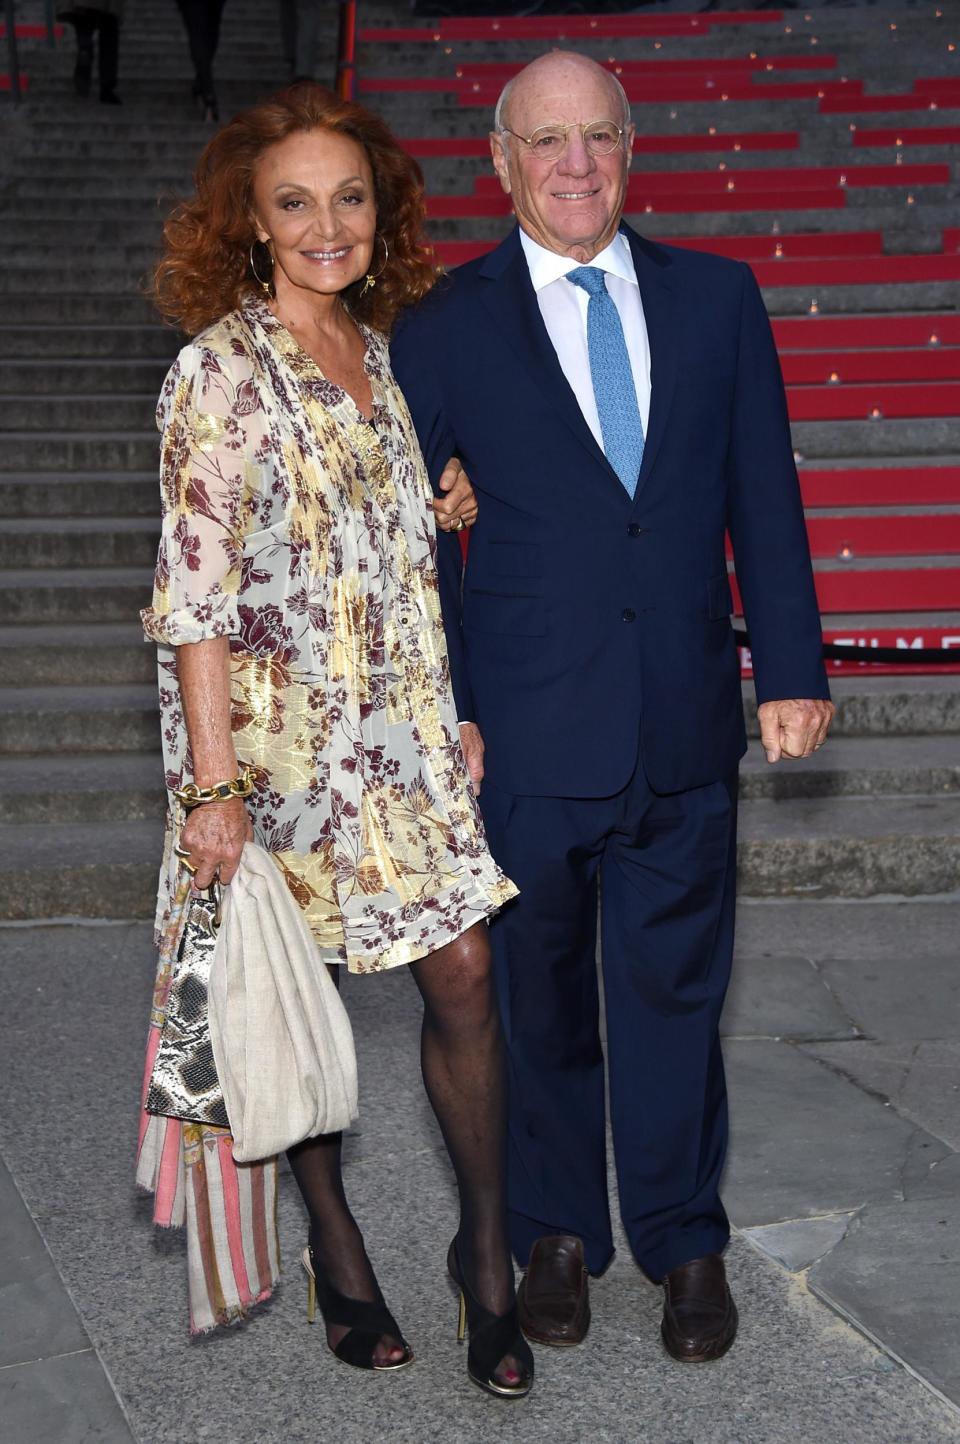 DVF with Barry Diller